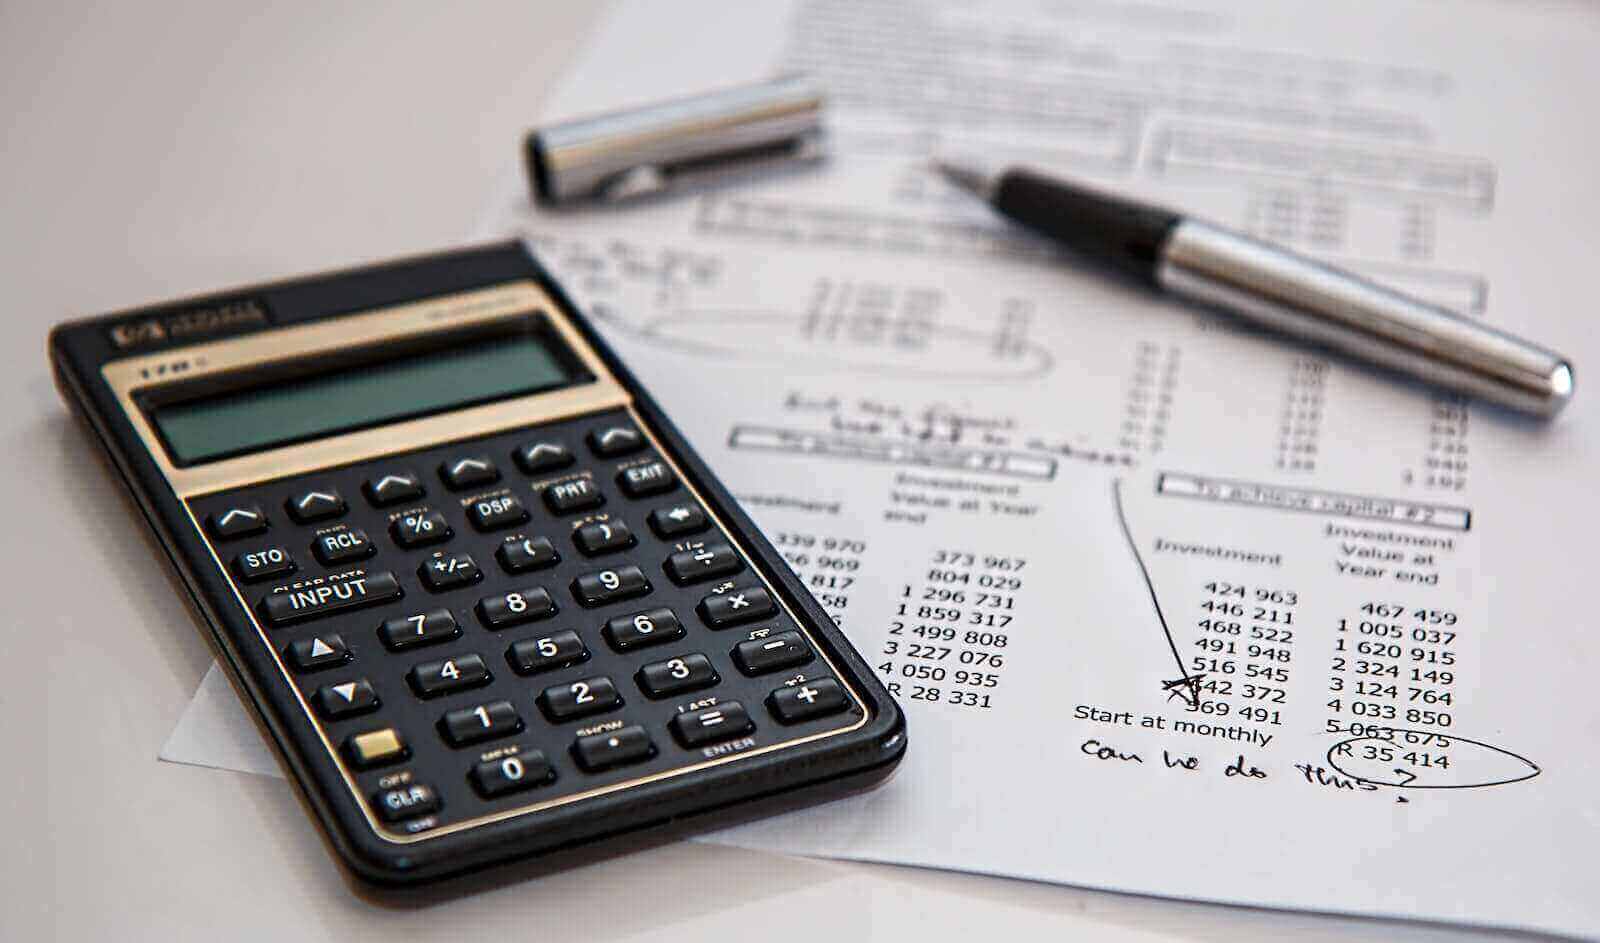 calculating full cost of entering invoices